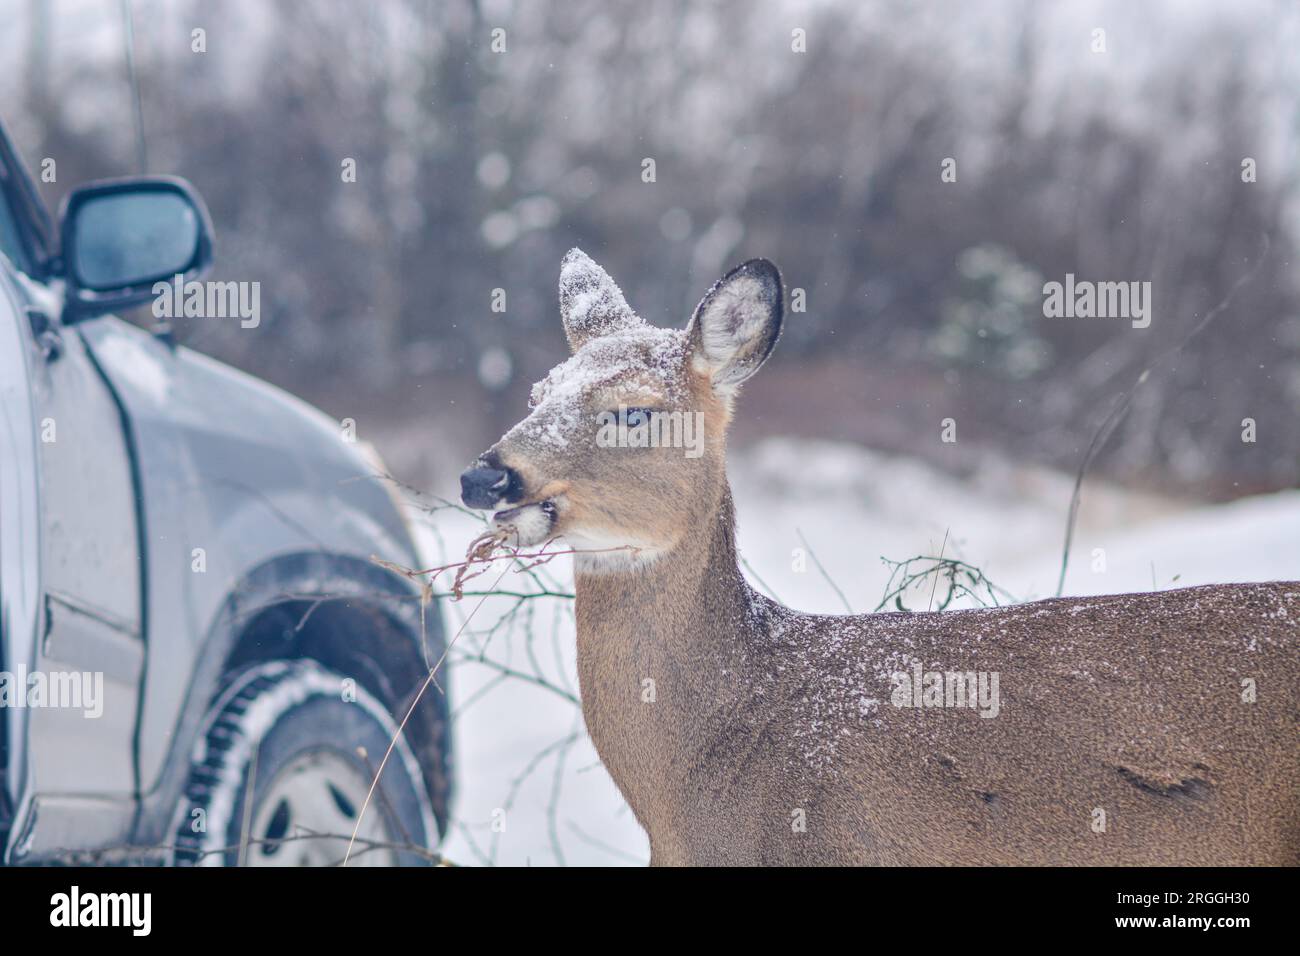 Hungry deer looking for food during winter season Stock Photo